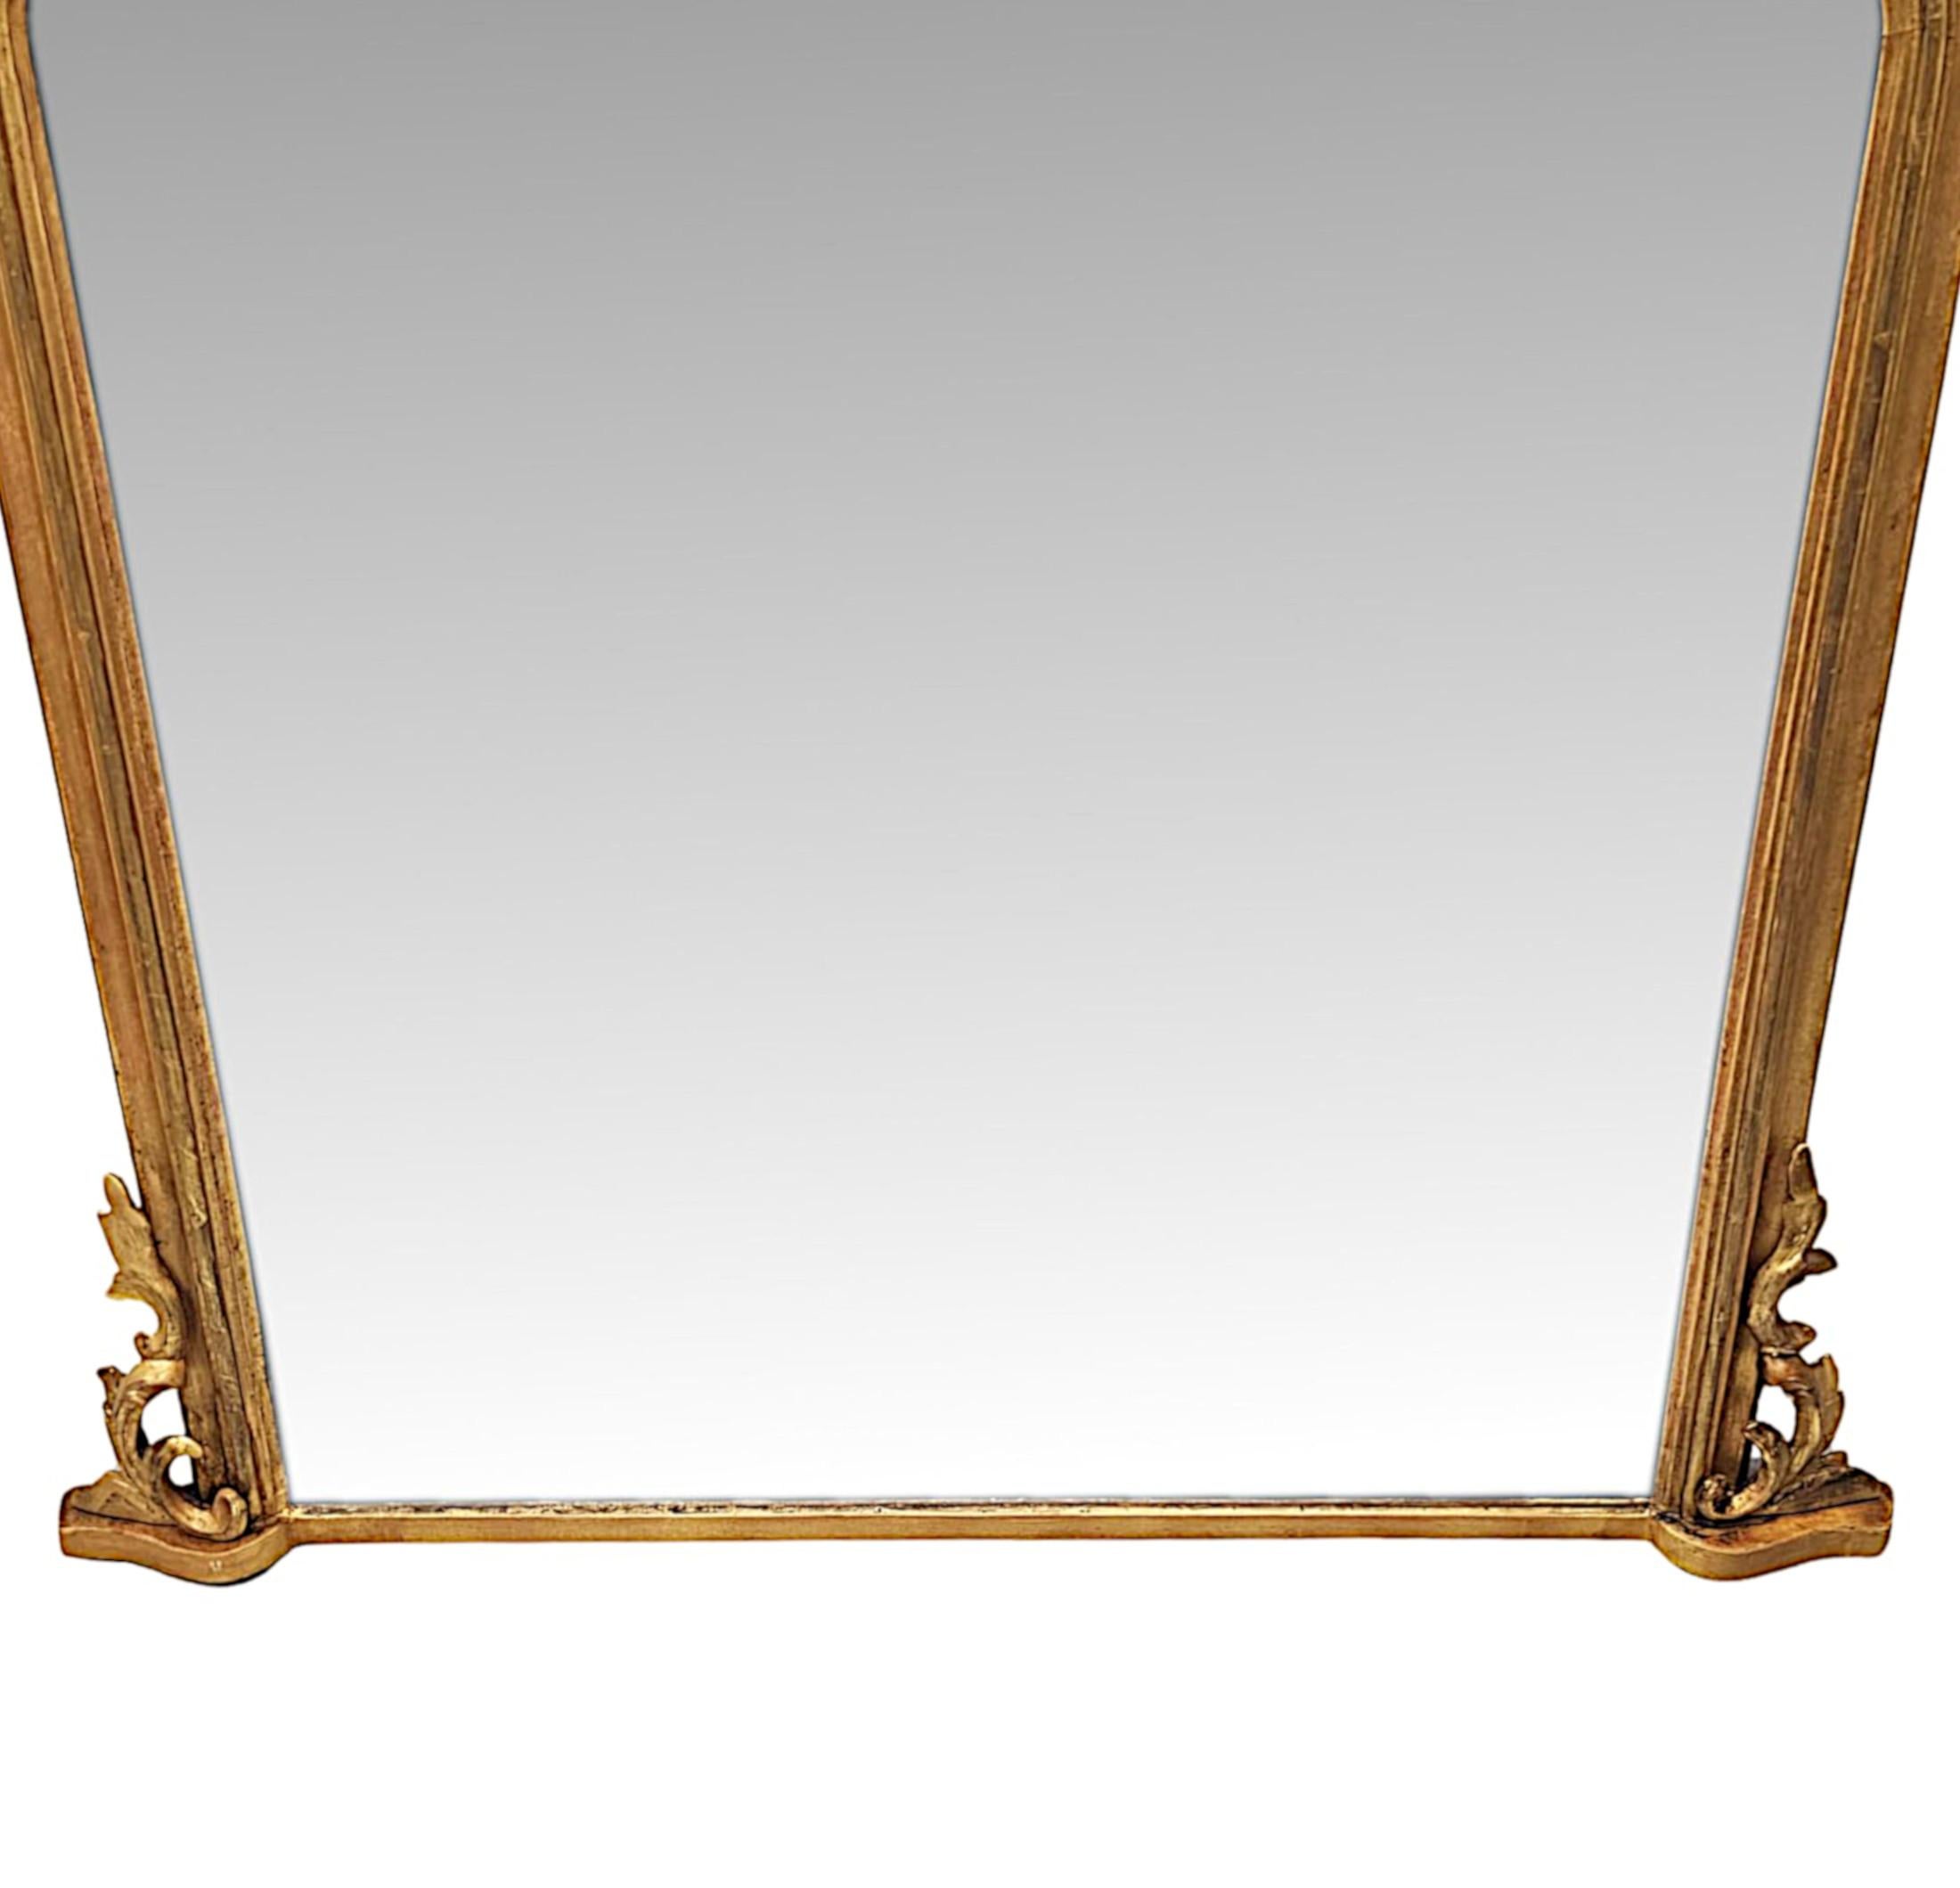  A Fabulous 19th Century Giltwood Archtop Overmantel Mirror In Good Condition For Sale In Dublin, IE